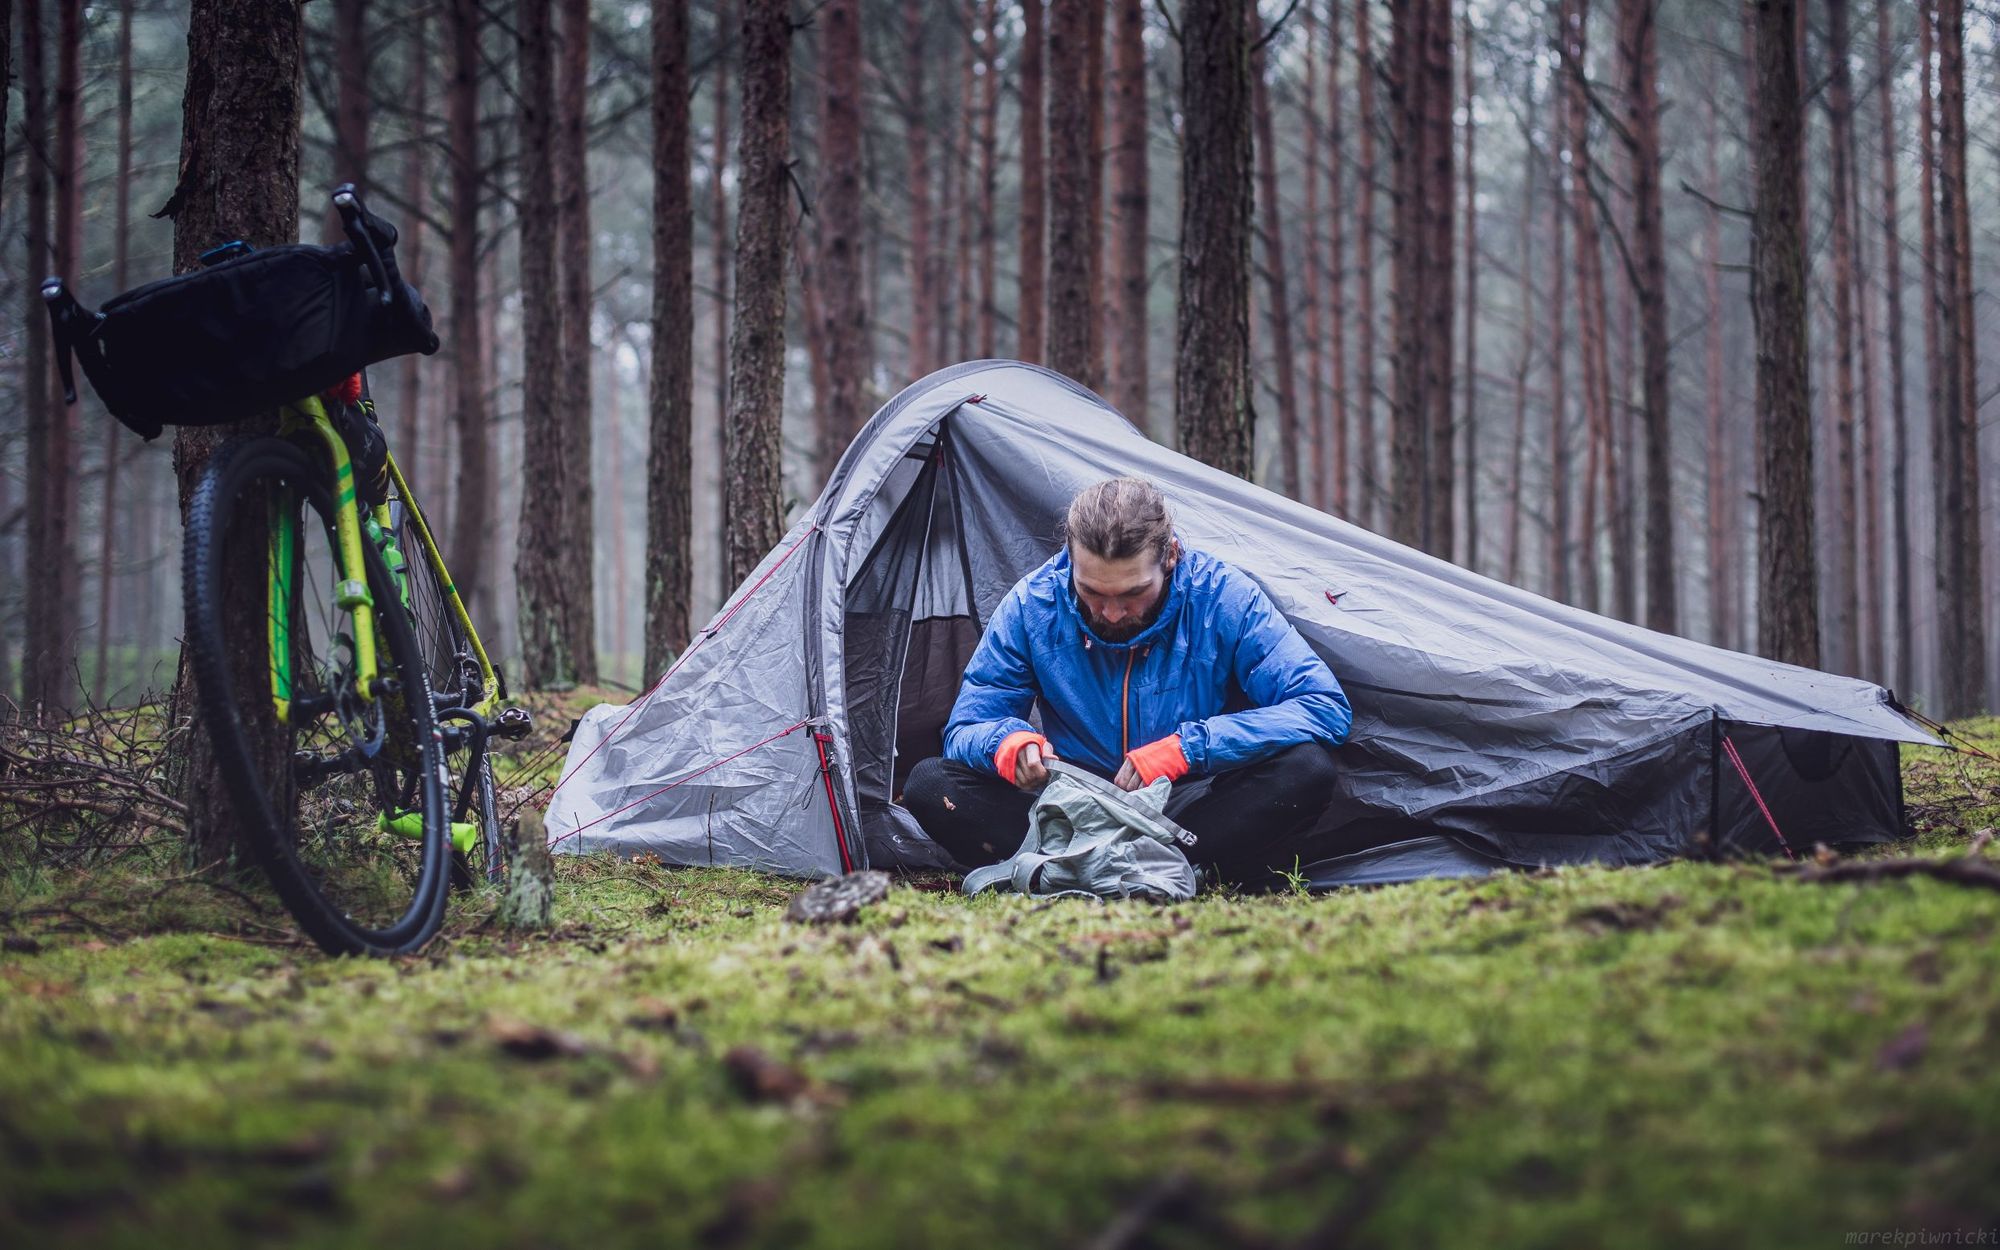 A camper sitting outside his tent in a forest, with a bike on the left hand side.